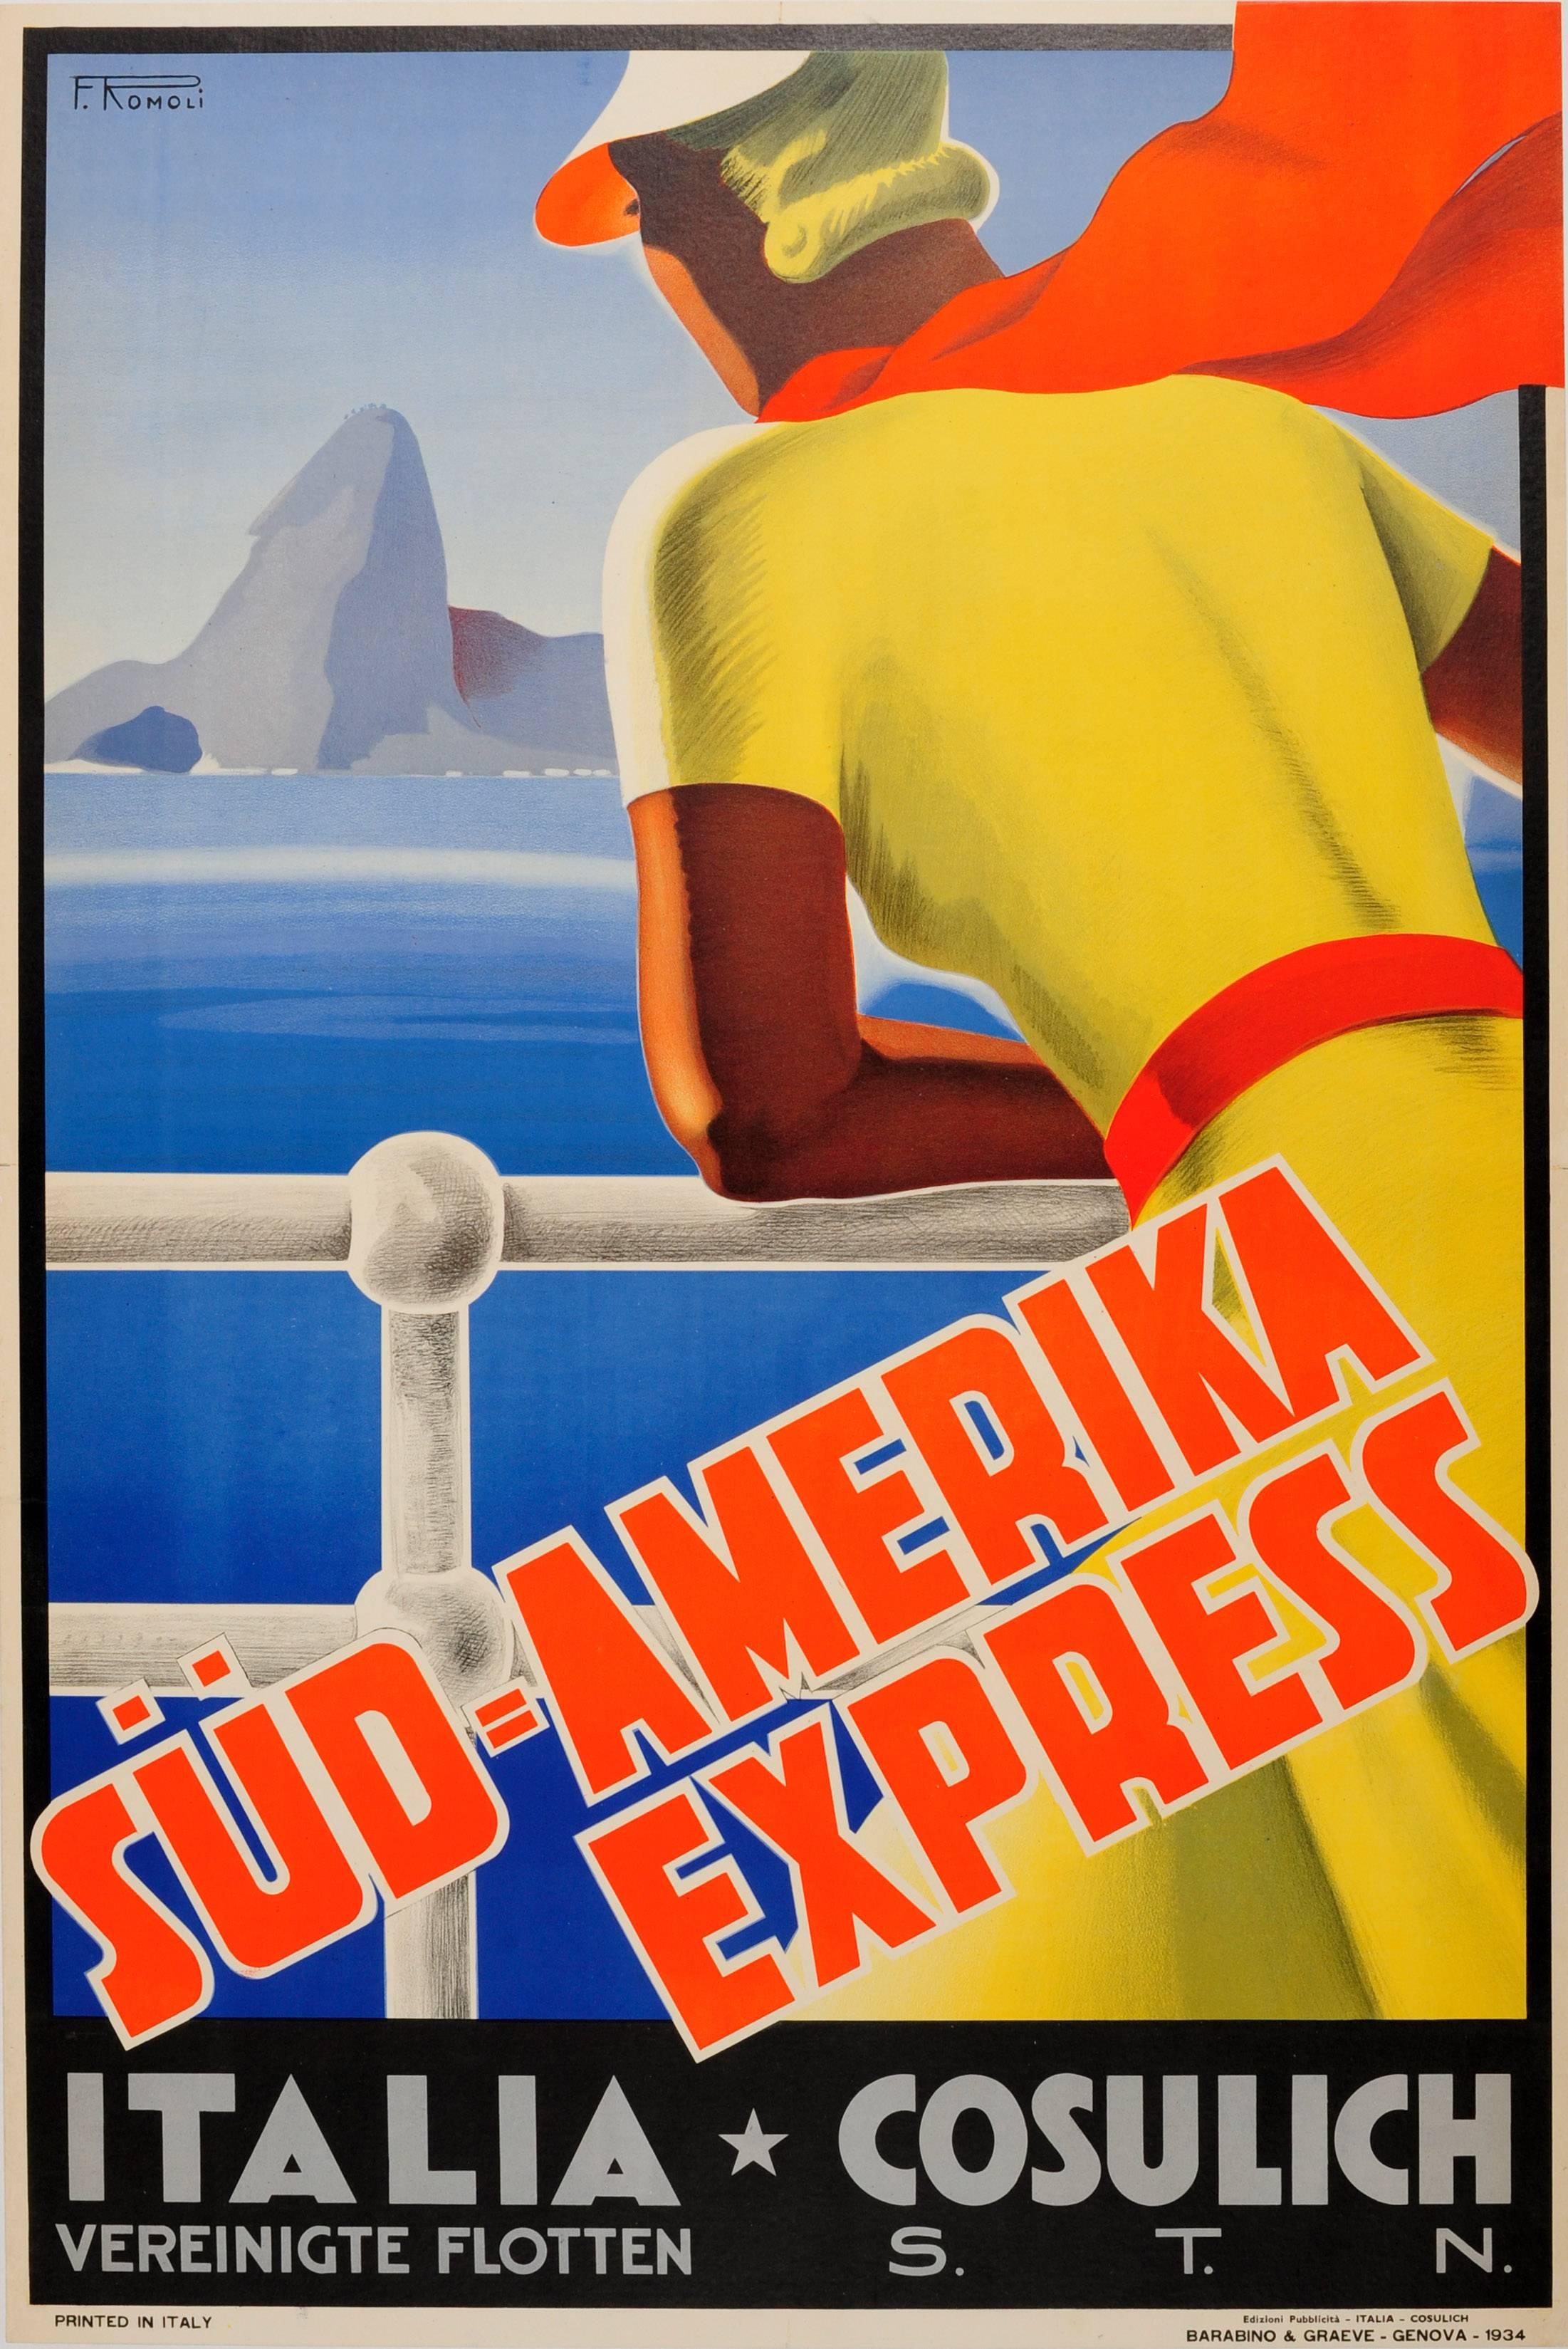 Filippo Romoli Print - Original Cruise Line Travel Poster Advertising Express Services To South America